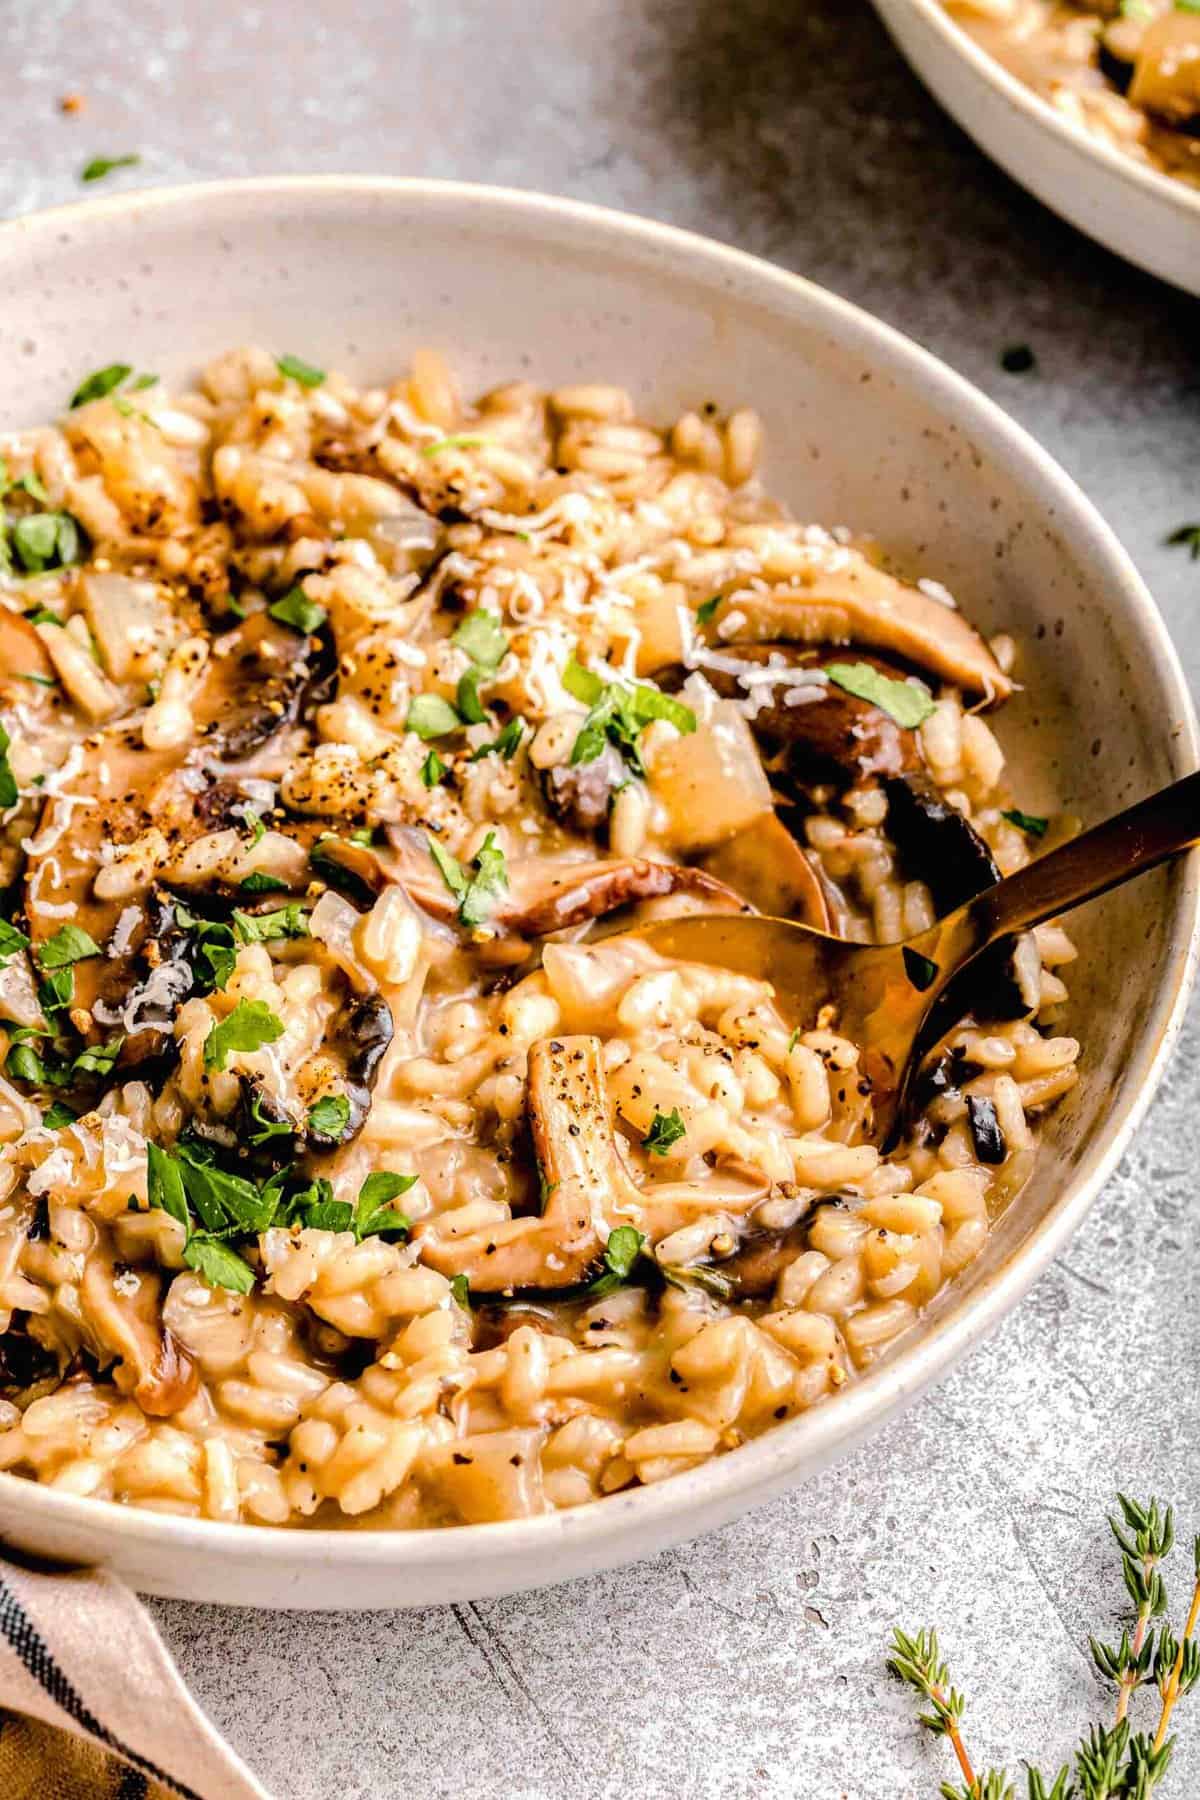 Mushroom risotto in a dinner bowl with a spoon; garnished with fresh parsley.